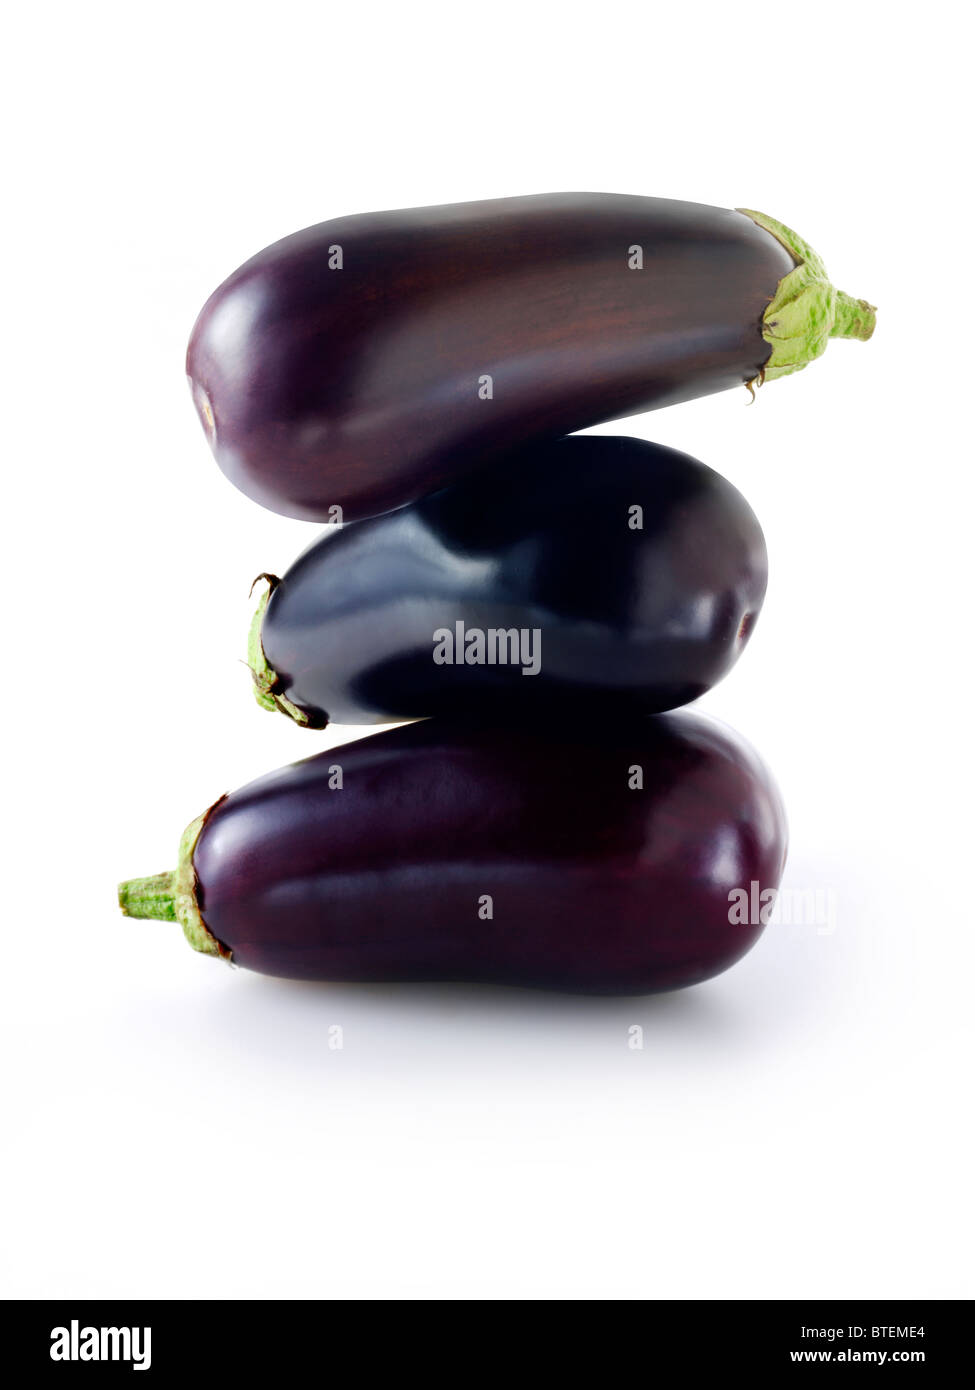 Fresh whole uncut aubergines or eggplants isolated against a white background Stock Photo